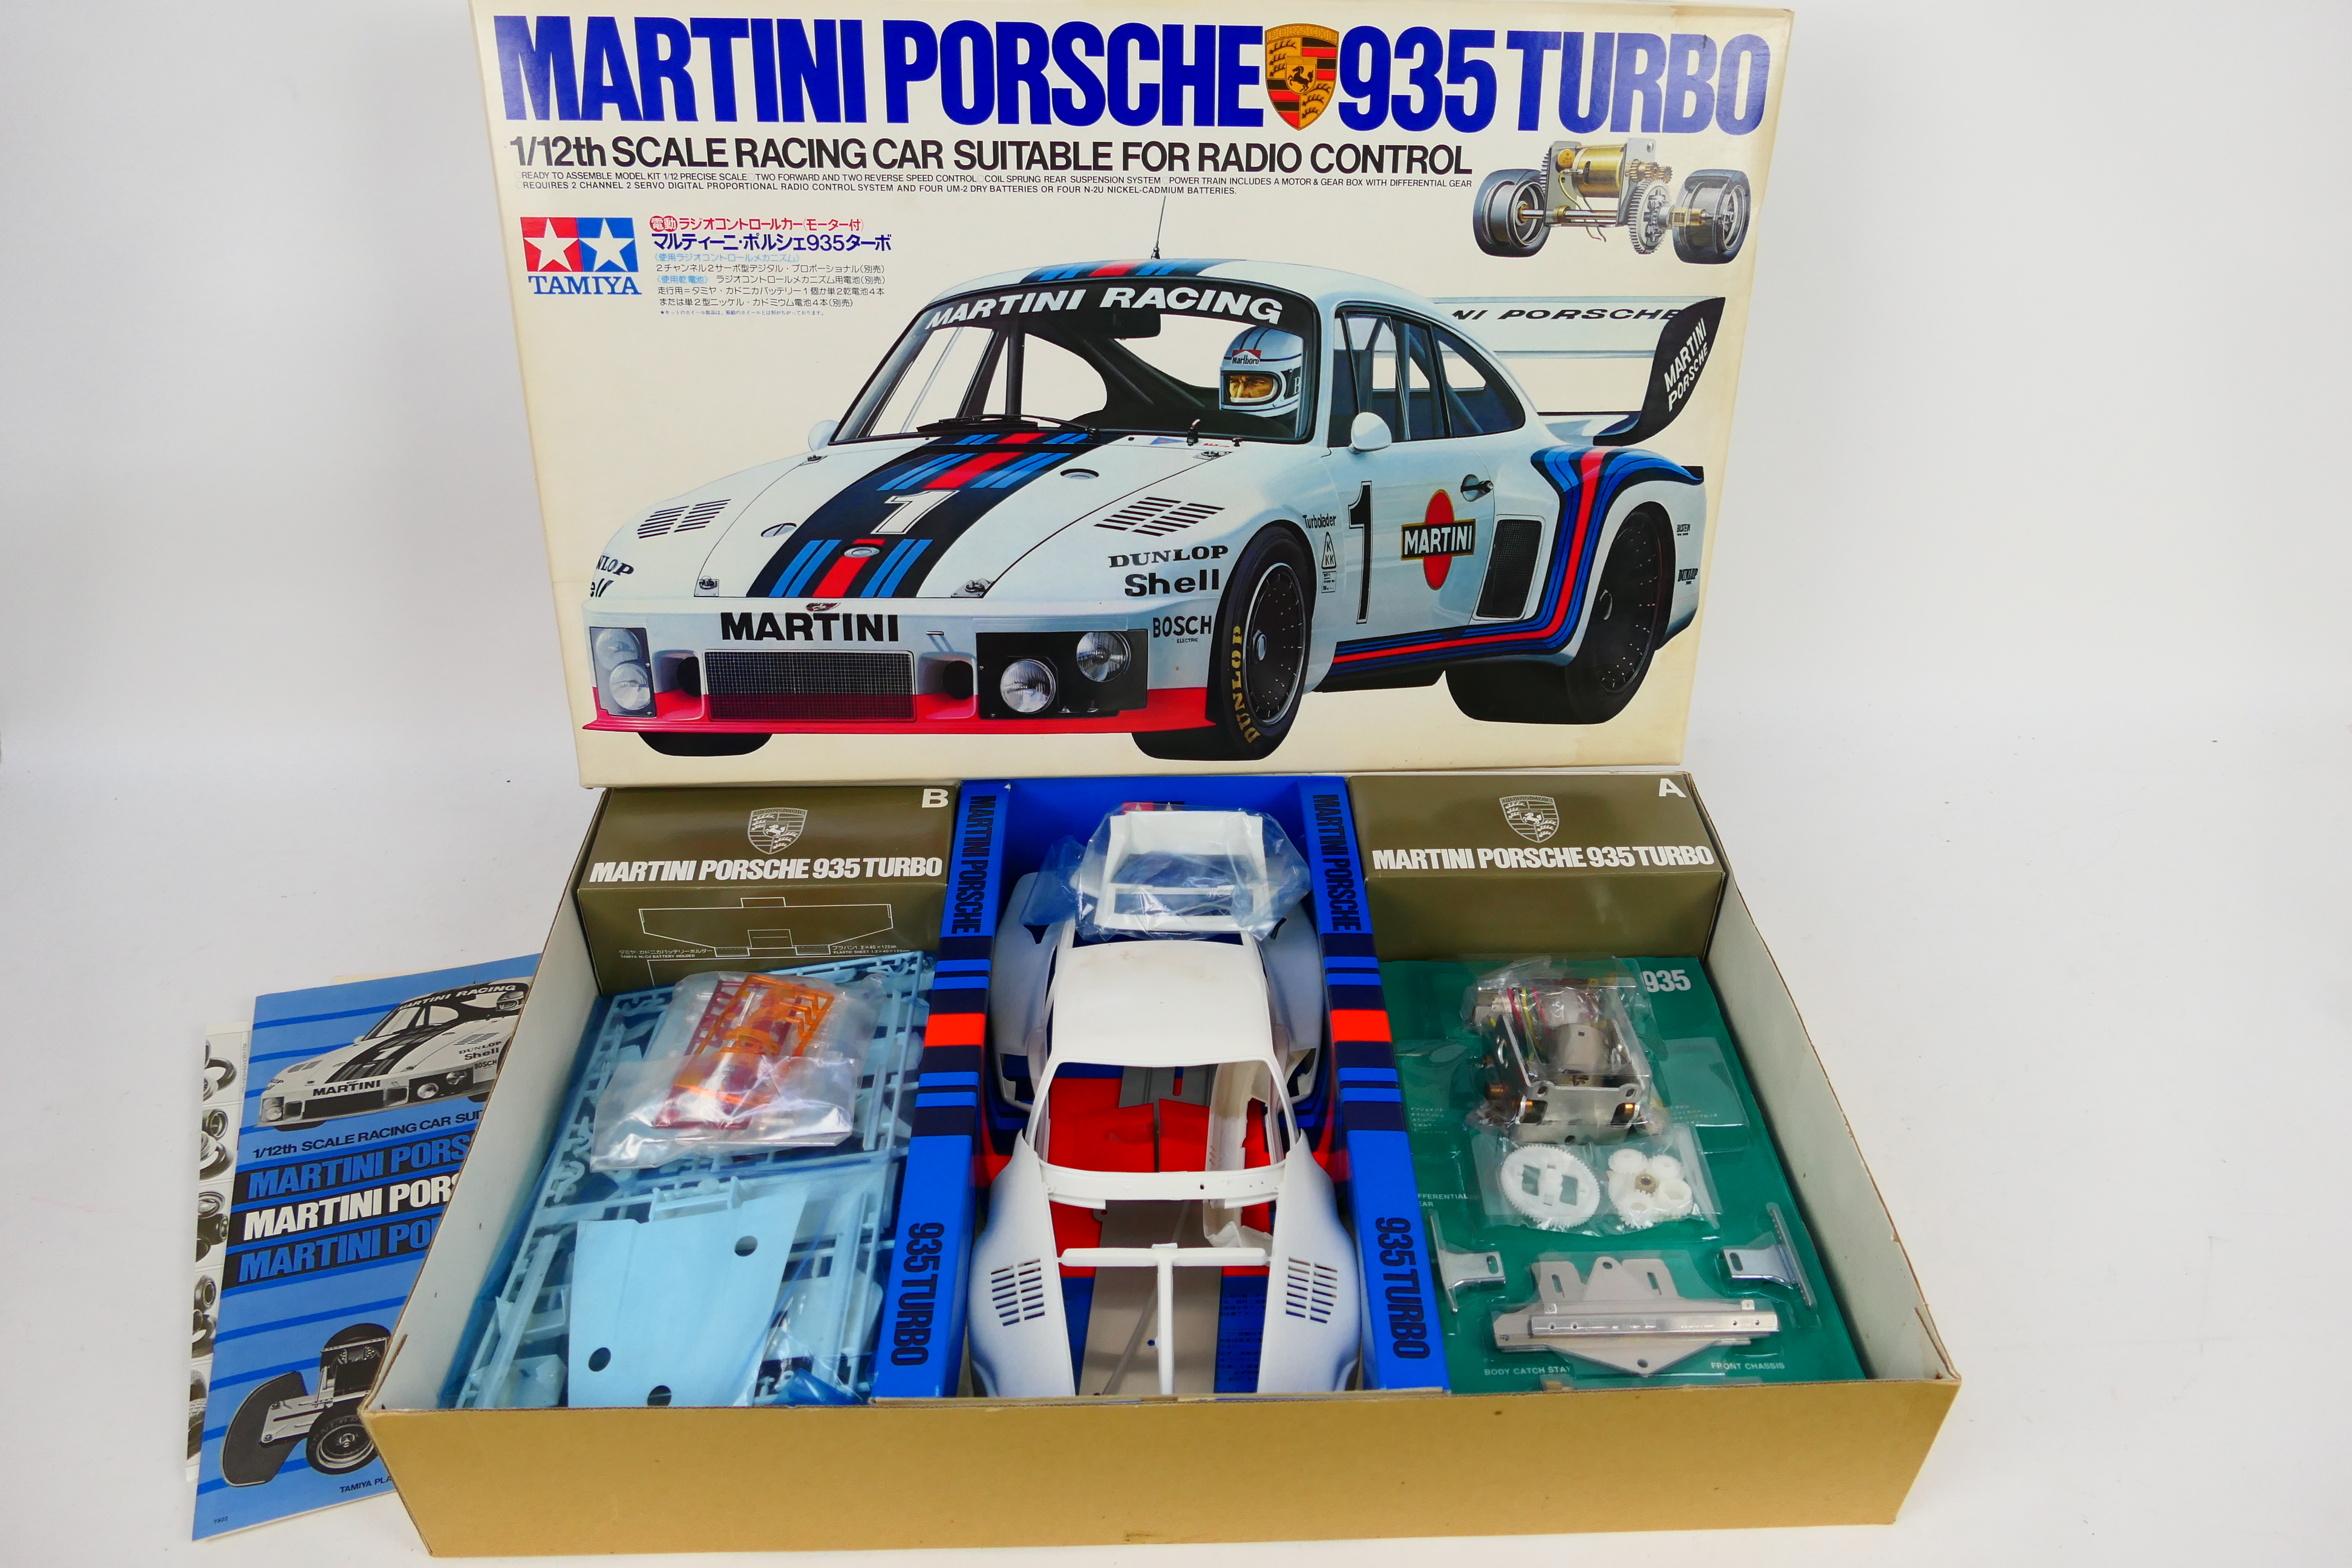 Tamiya - A boxed unmade motorised Porsche 935 Turbo model kit in 1:12 scale # RA1202.